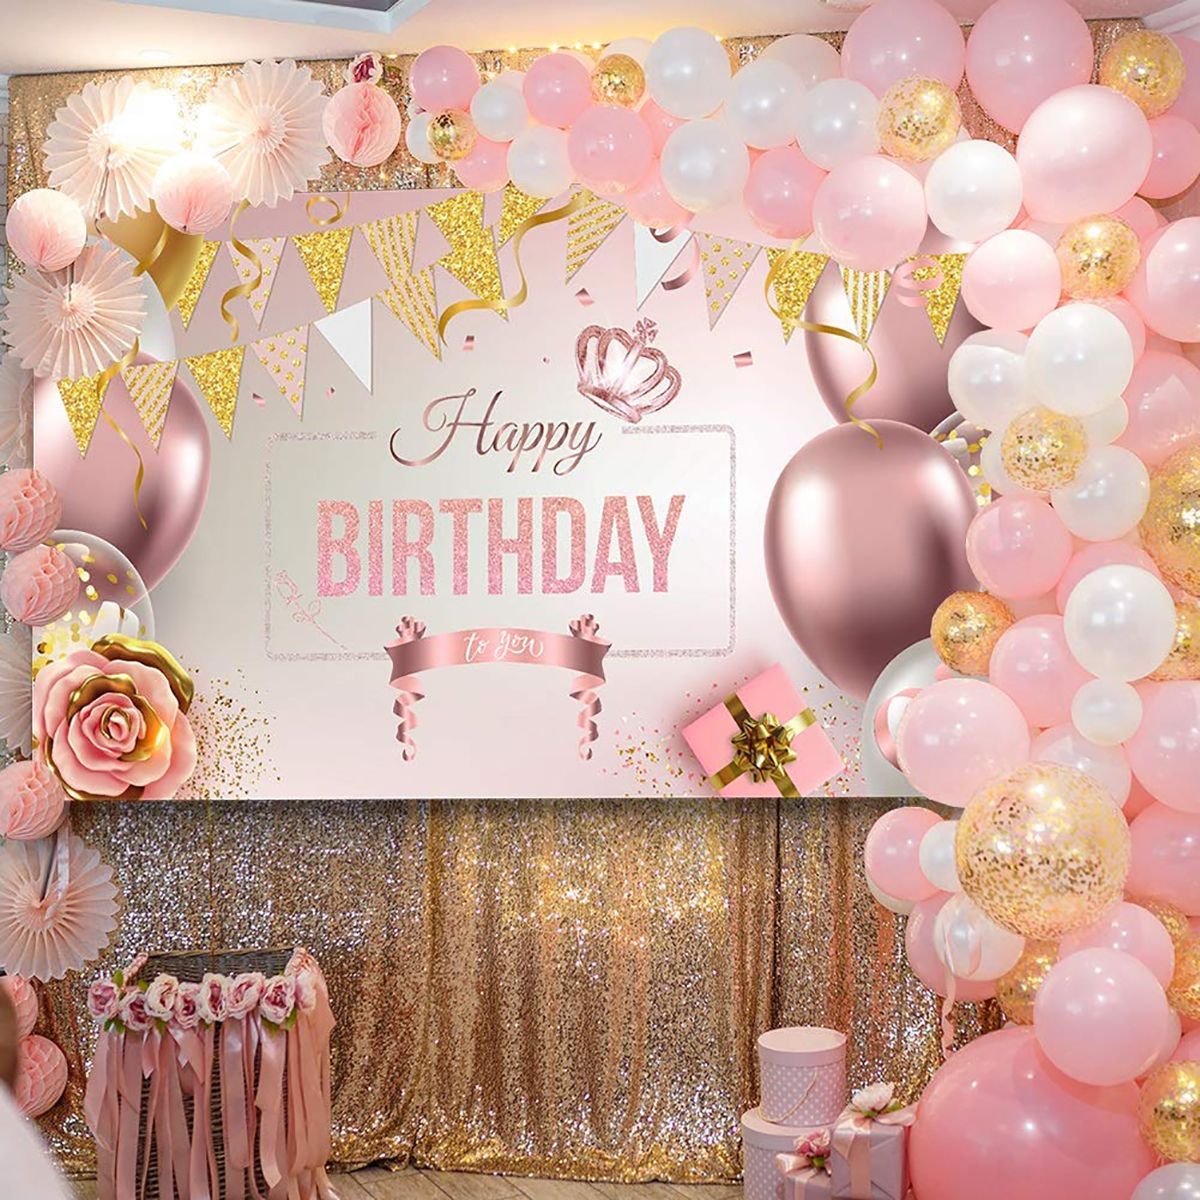 Happy-Birthday-Decorations-Banner-Large-Rose-Gold-Balloons-Backdrop-Theme-Poster-1834298